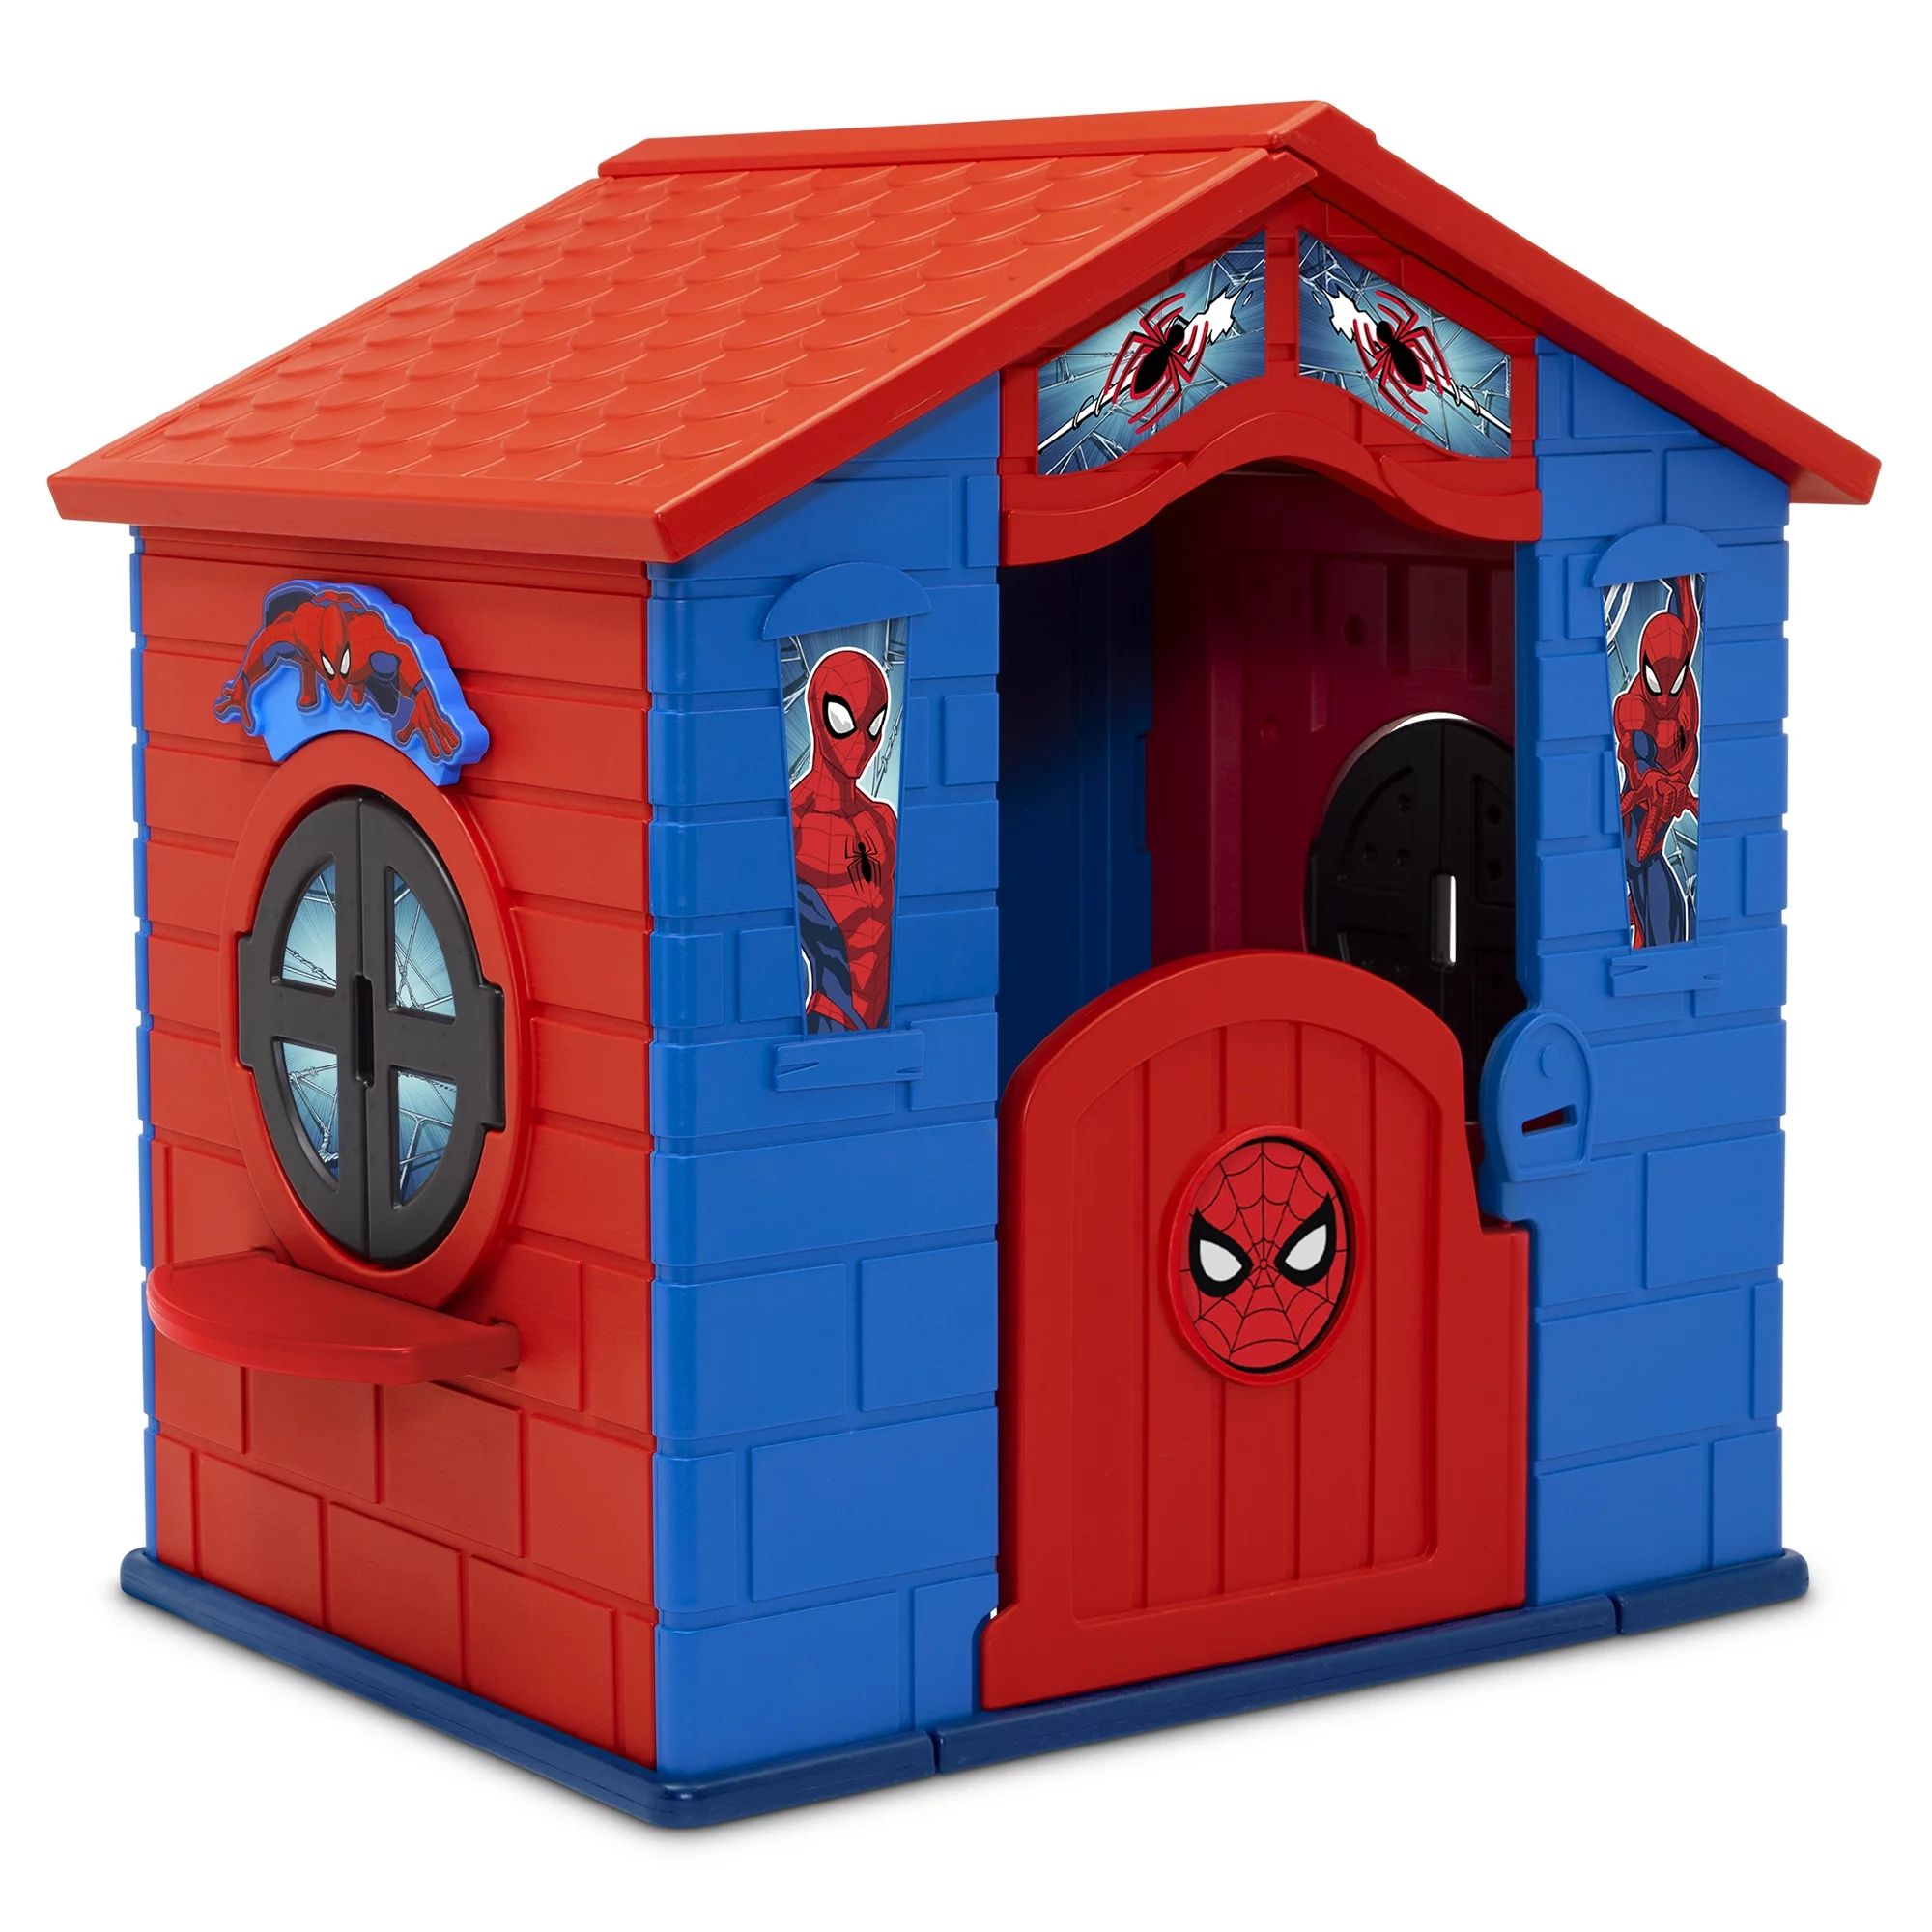 Marvel Spider-Man Plastic Indoor/Outdoor Playhouse with Easy Assembly by Delta Children, Blue/Red | Walmart (US)